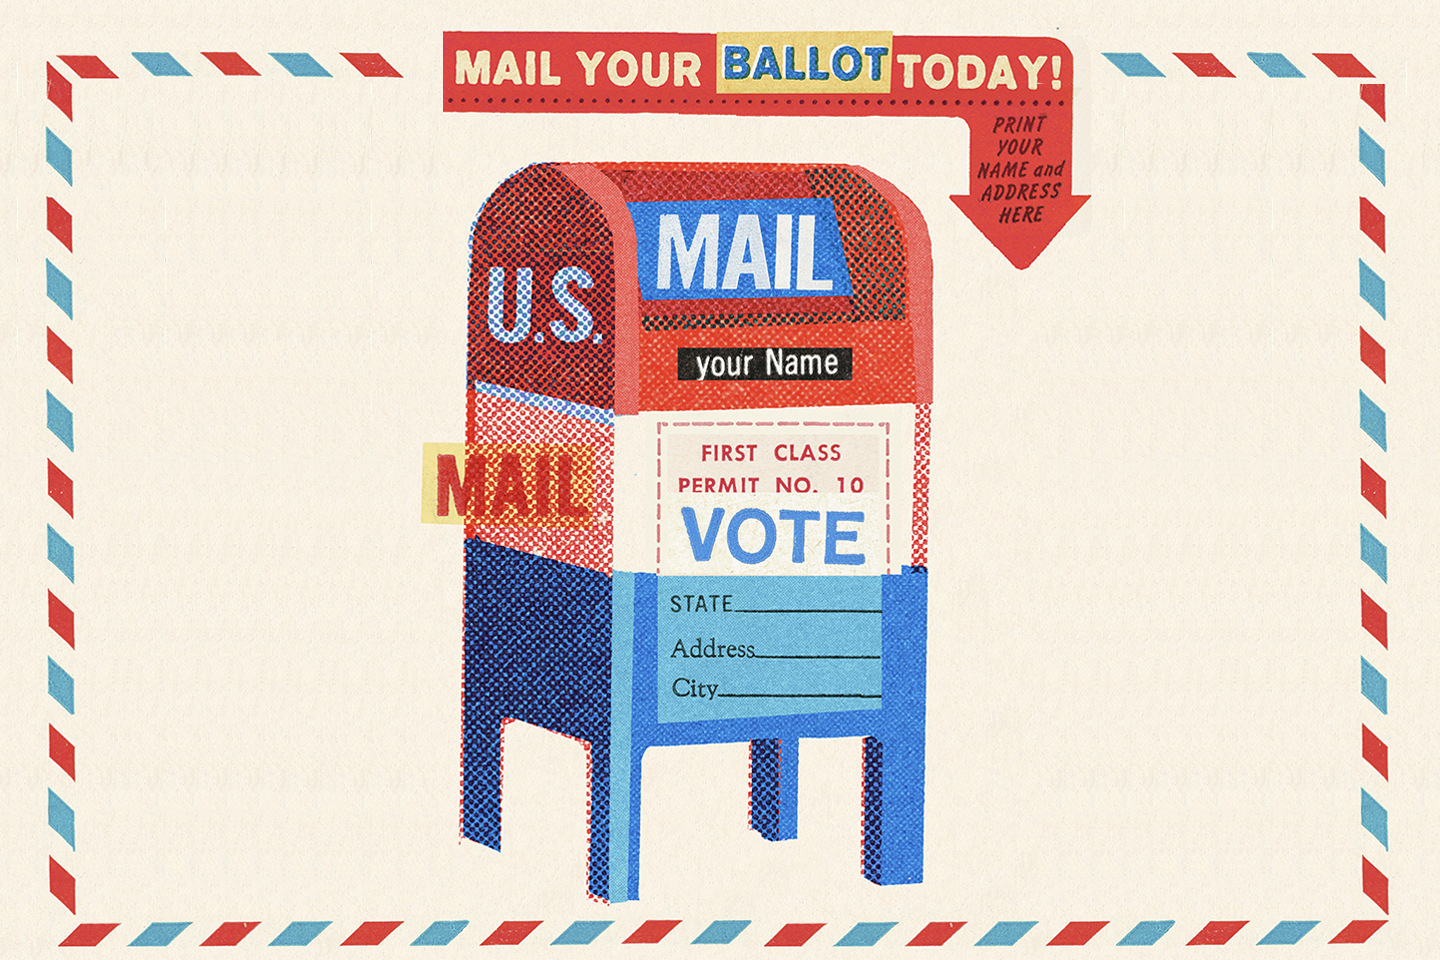 An illustration of a mailbox with a voter ticket on the front.